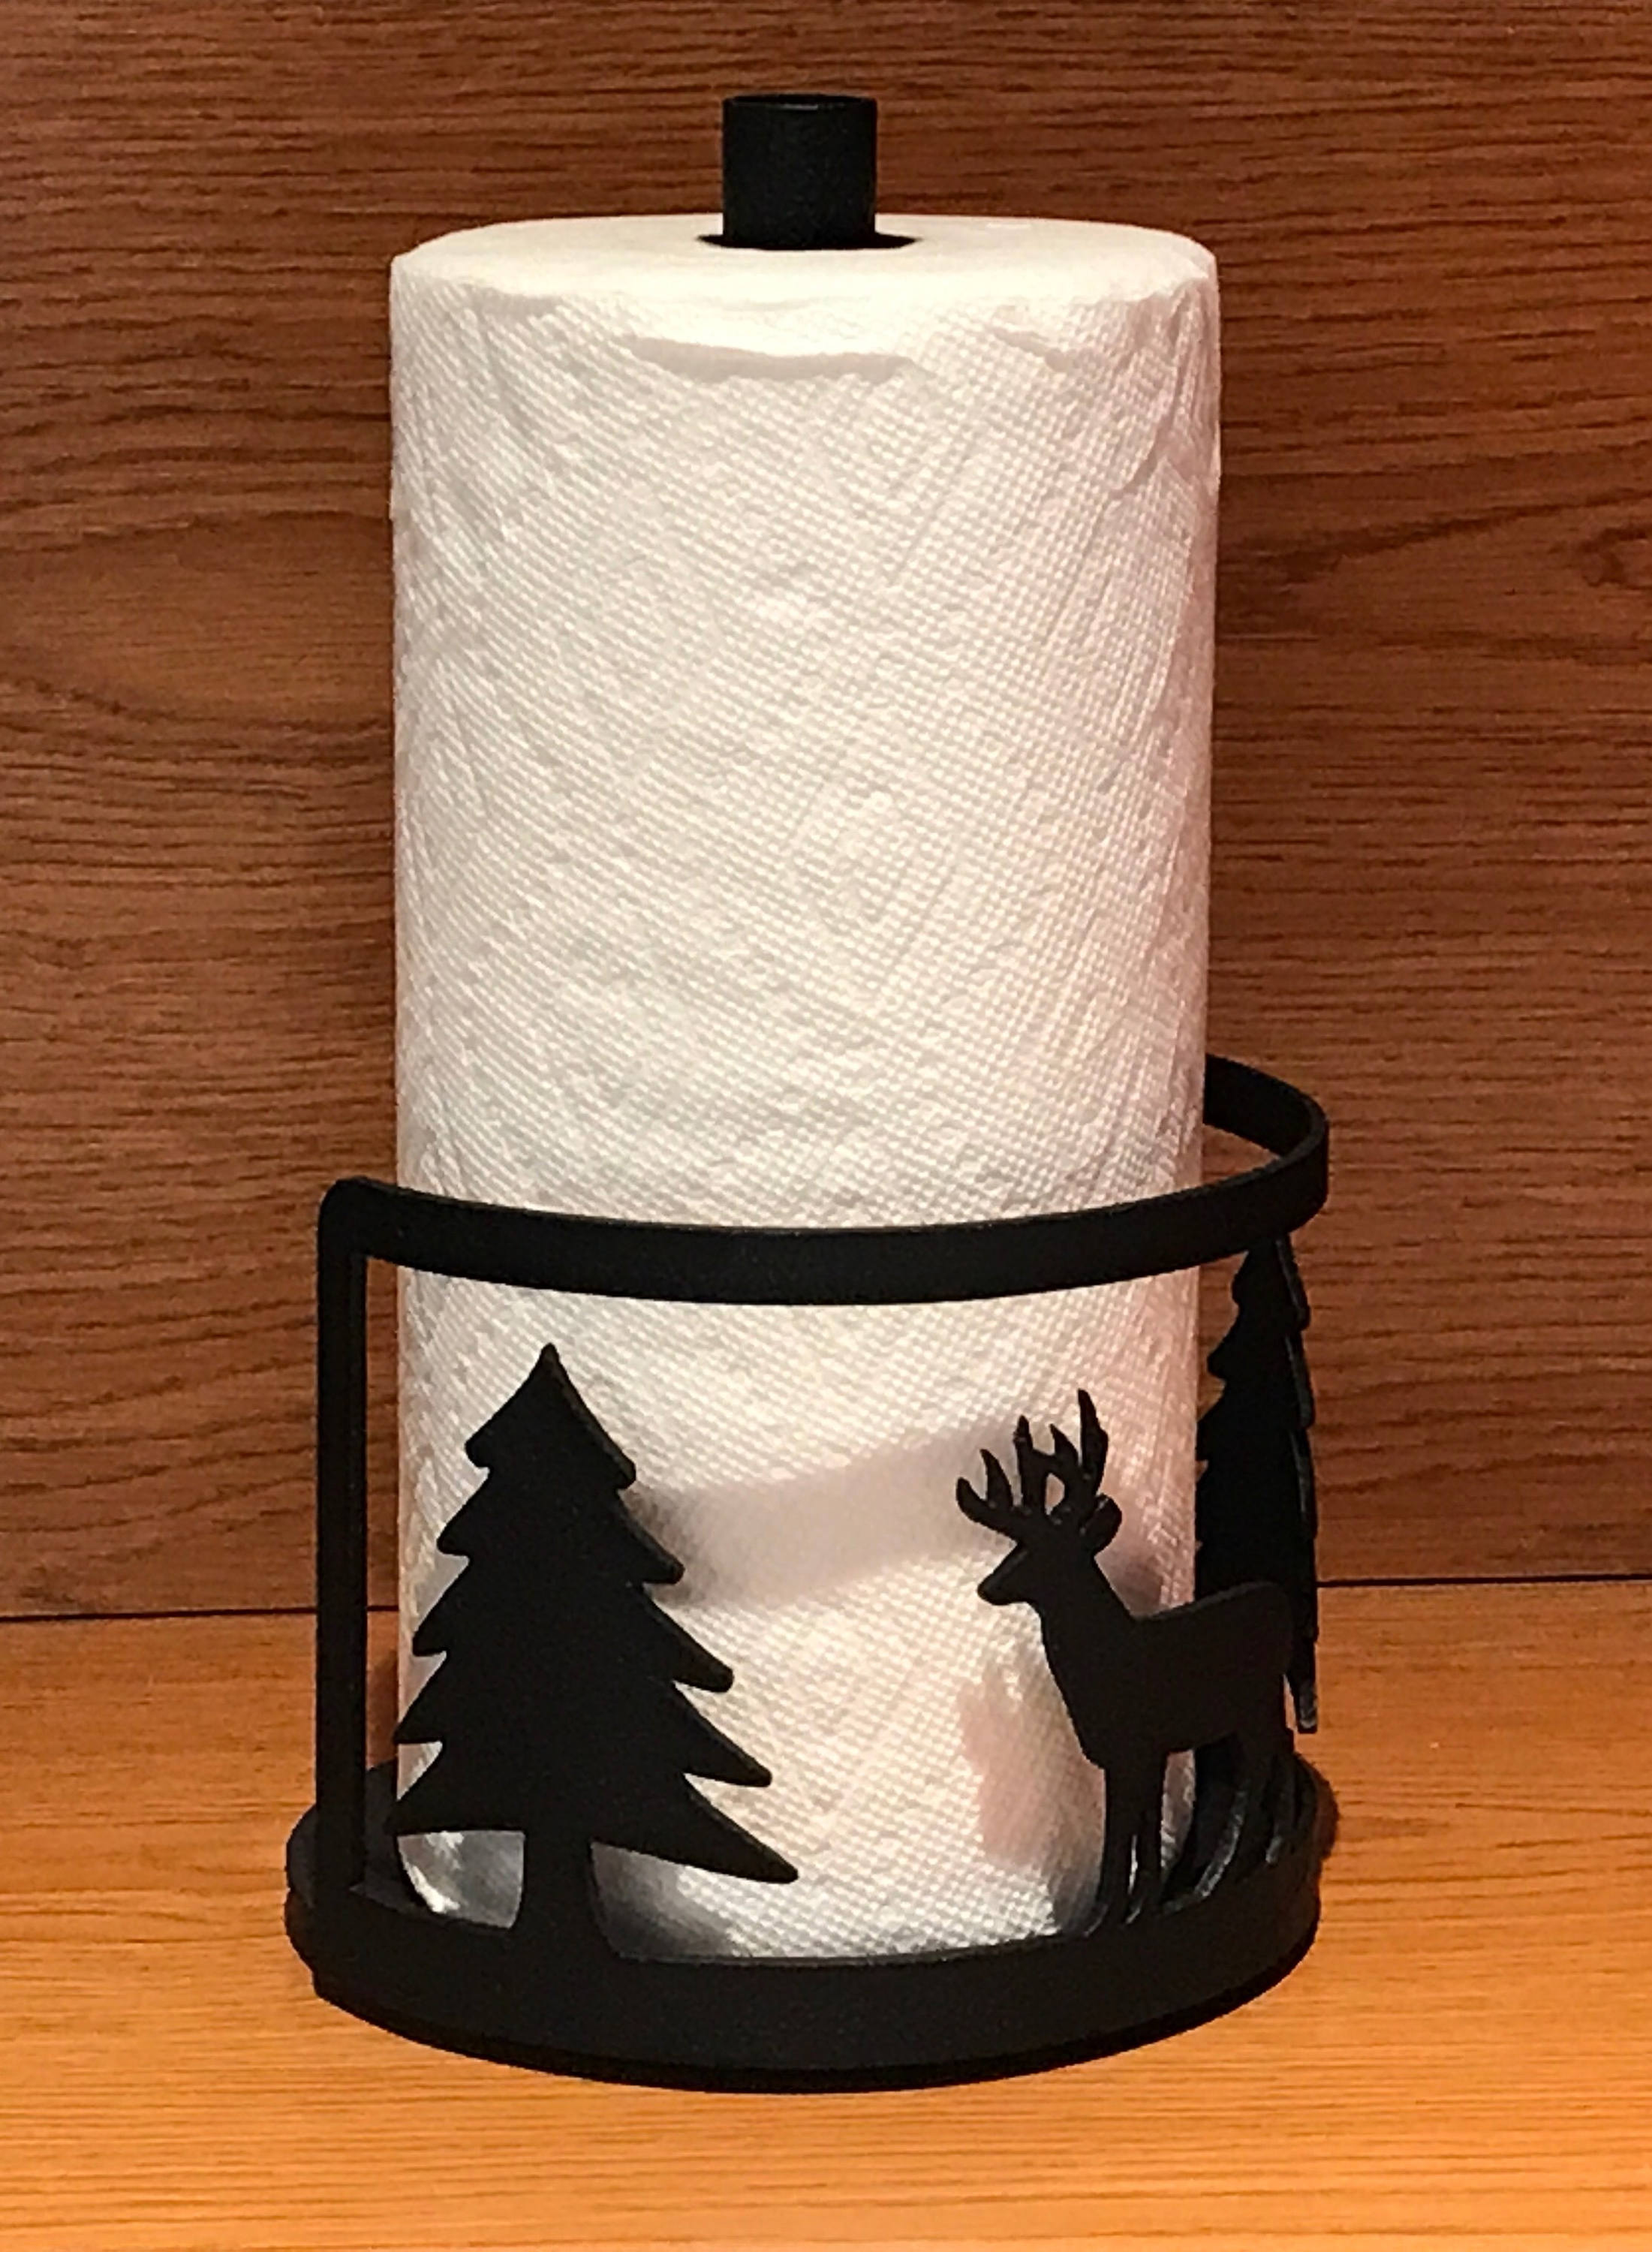 Ez-Roll Holder, Paper Towel holder for Camping, Cars, RV, Outdoors, Indoors  use